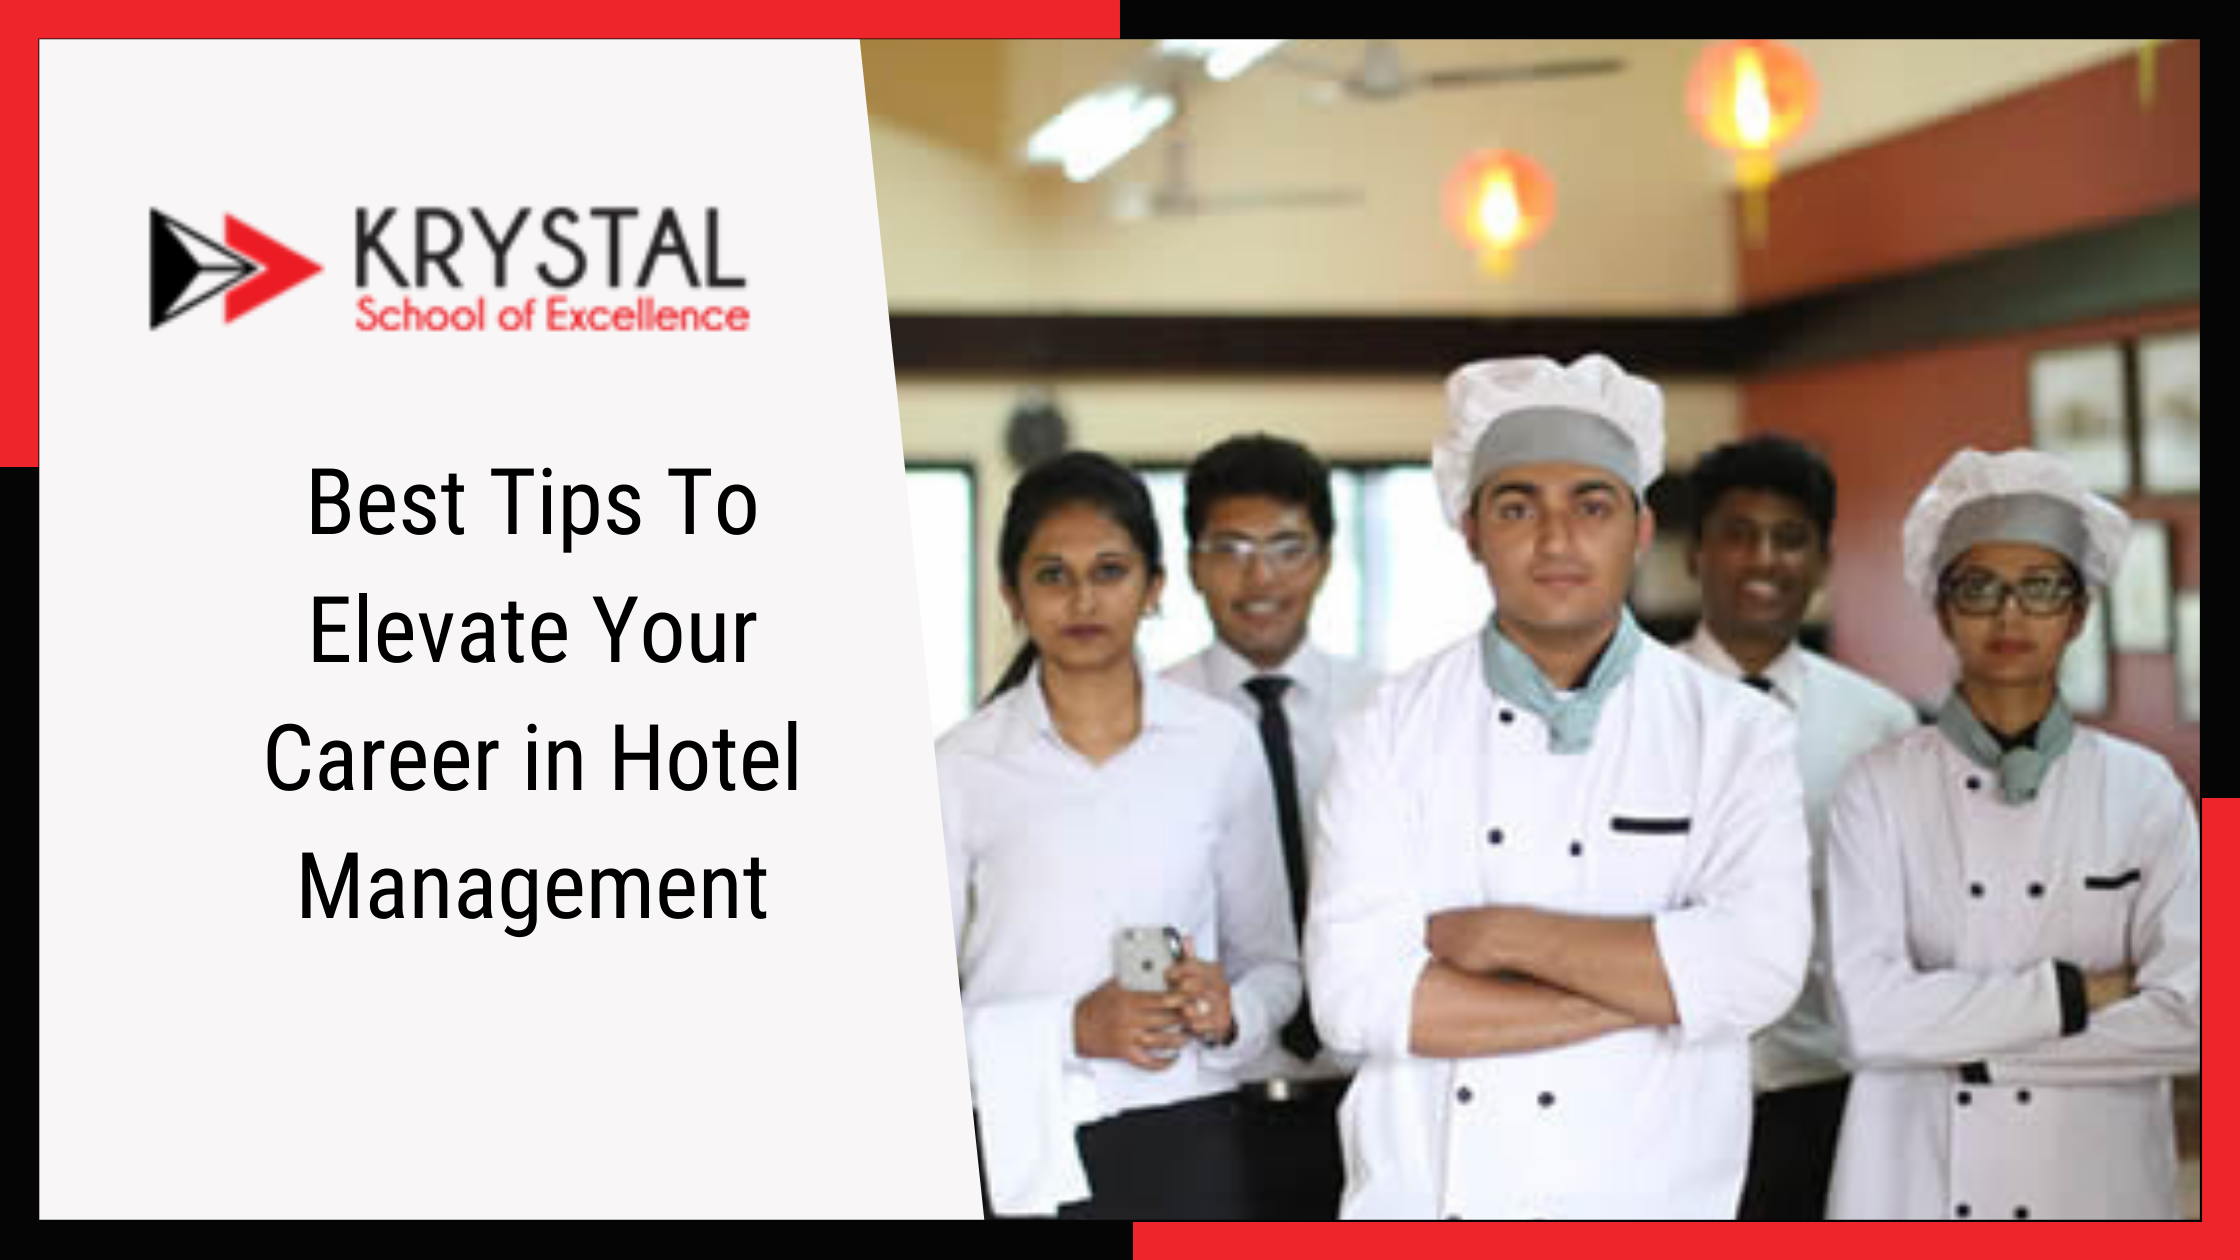 Best Tips To Elevate Your Career in Hotel Management